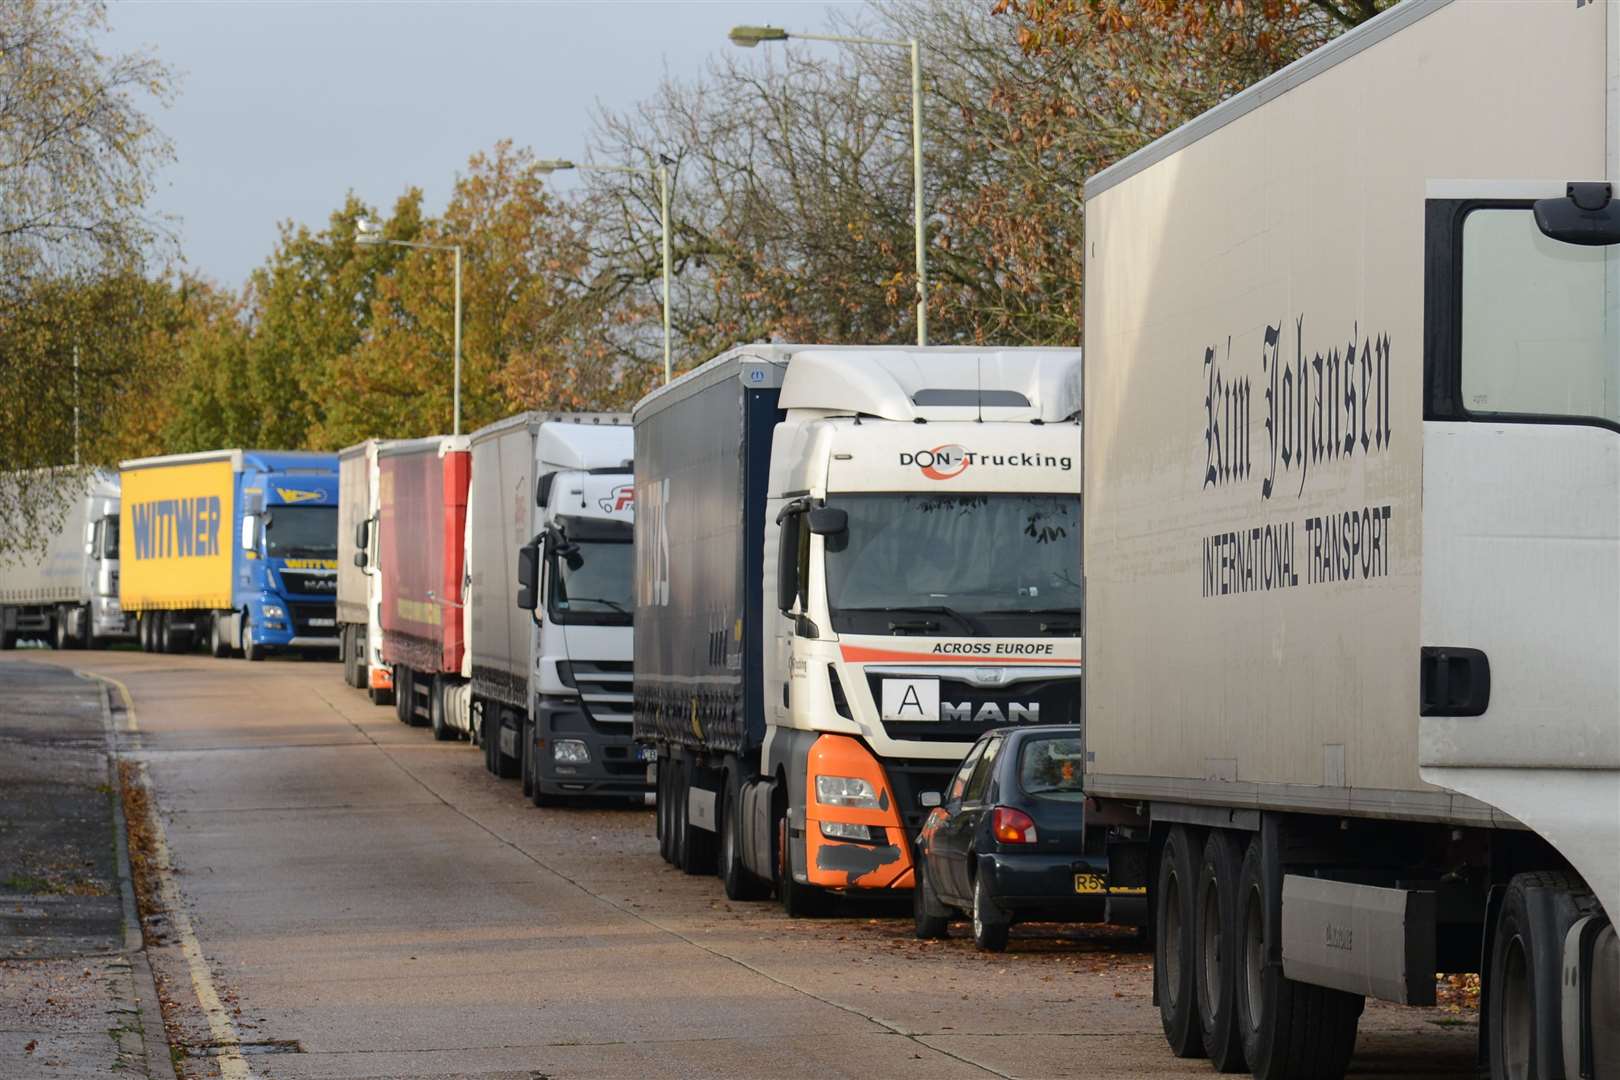 Thousands of lorries are set to head to Ashford for customs checks